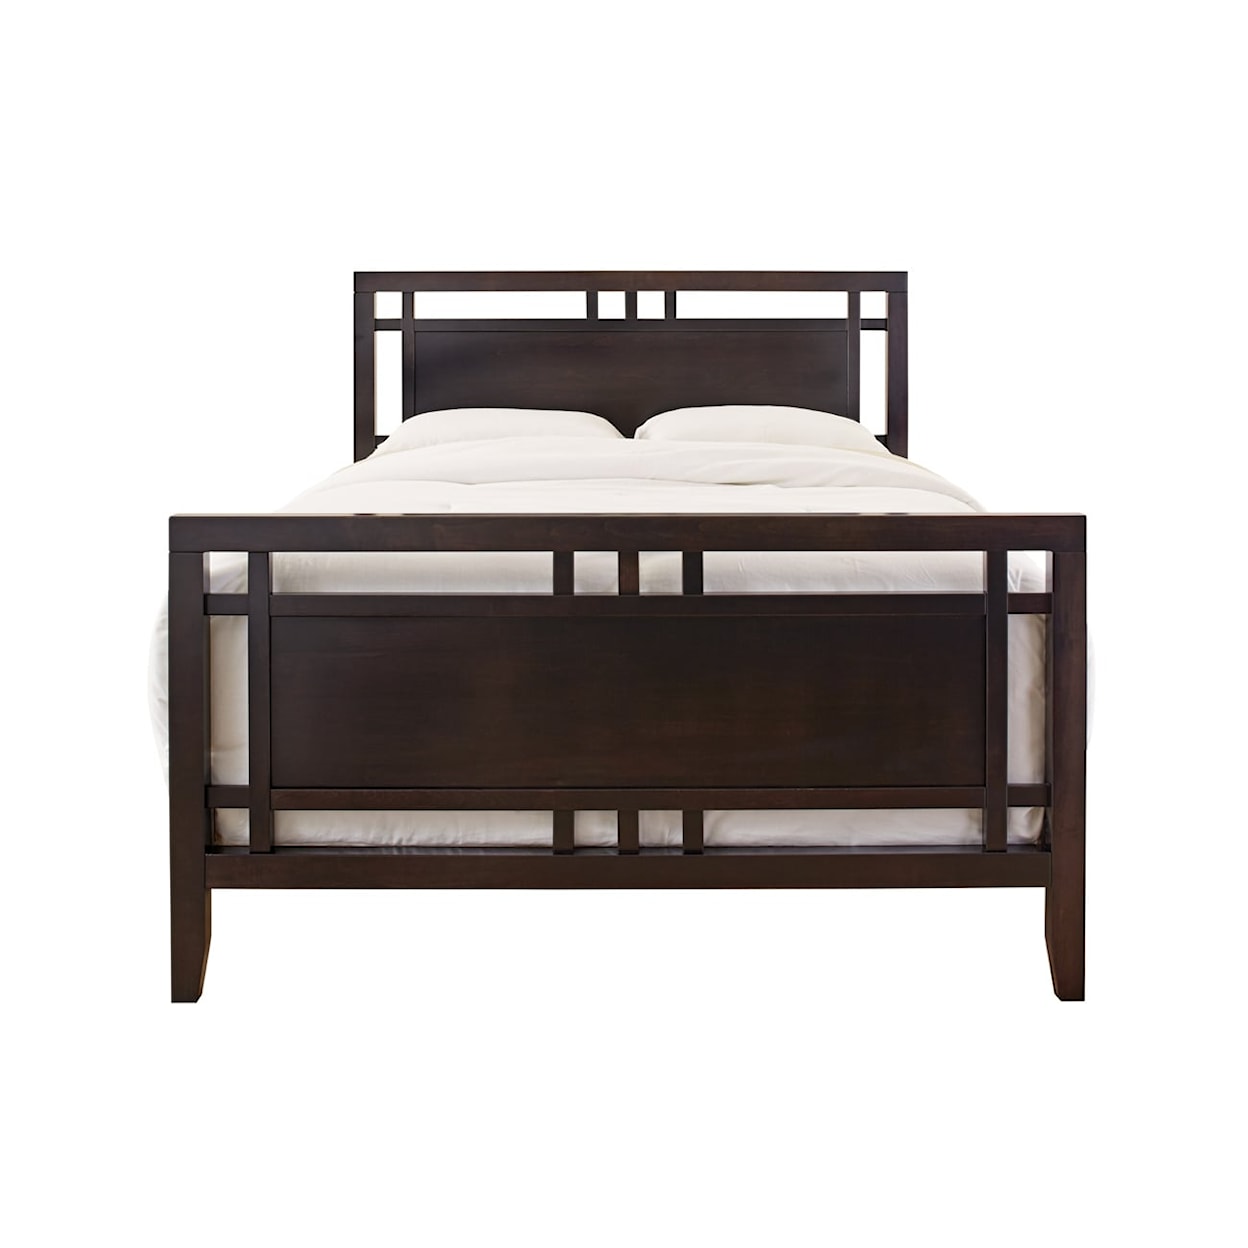 Mavin Atwood Group Atwood Queen High Footboard Gridwork Bed